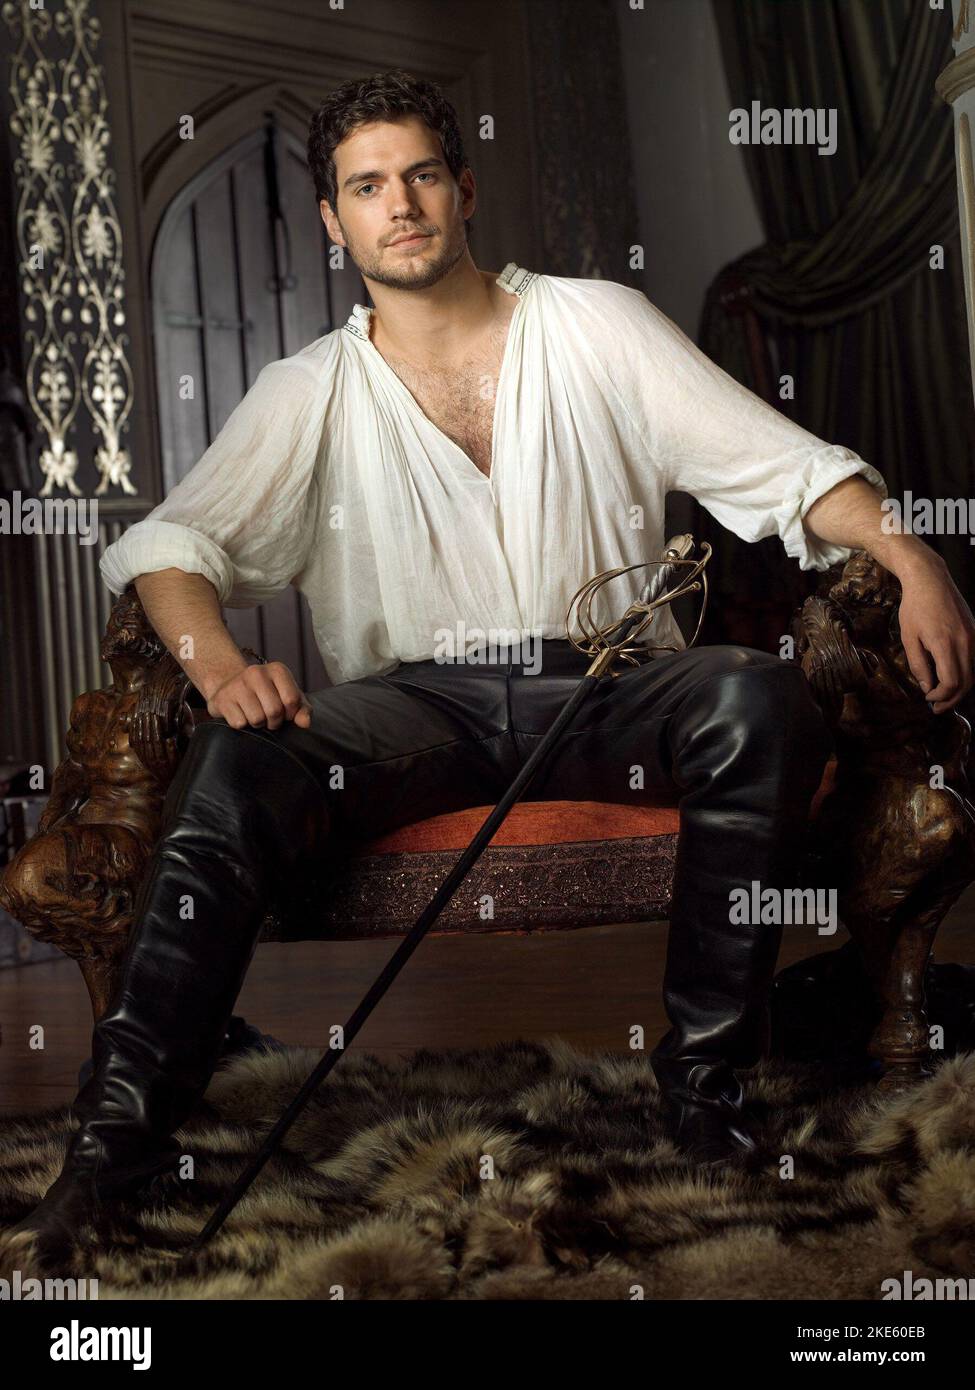 HENRY CAVILL in THE TUDORS (2007), directed by JEREMY PODESWA, MICHAEL HIRST, STEVE SHILL and CIARAN DONNELLY. Credit: BORD SCANNAN NA HEIREANN/CANADIAN BROADCASTING CORP./ Album Stock Photo